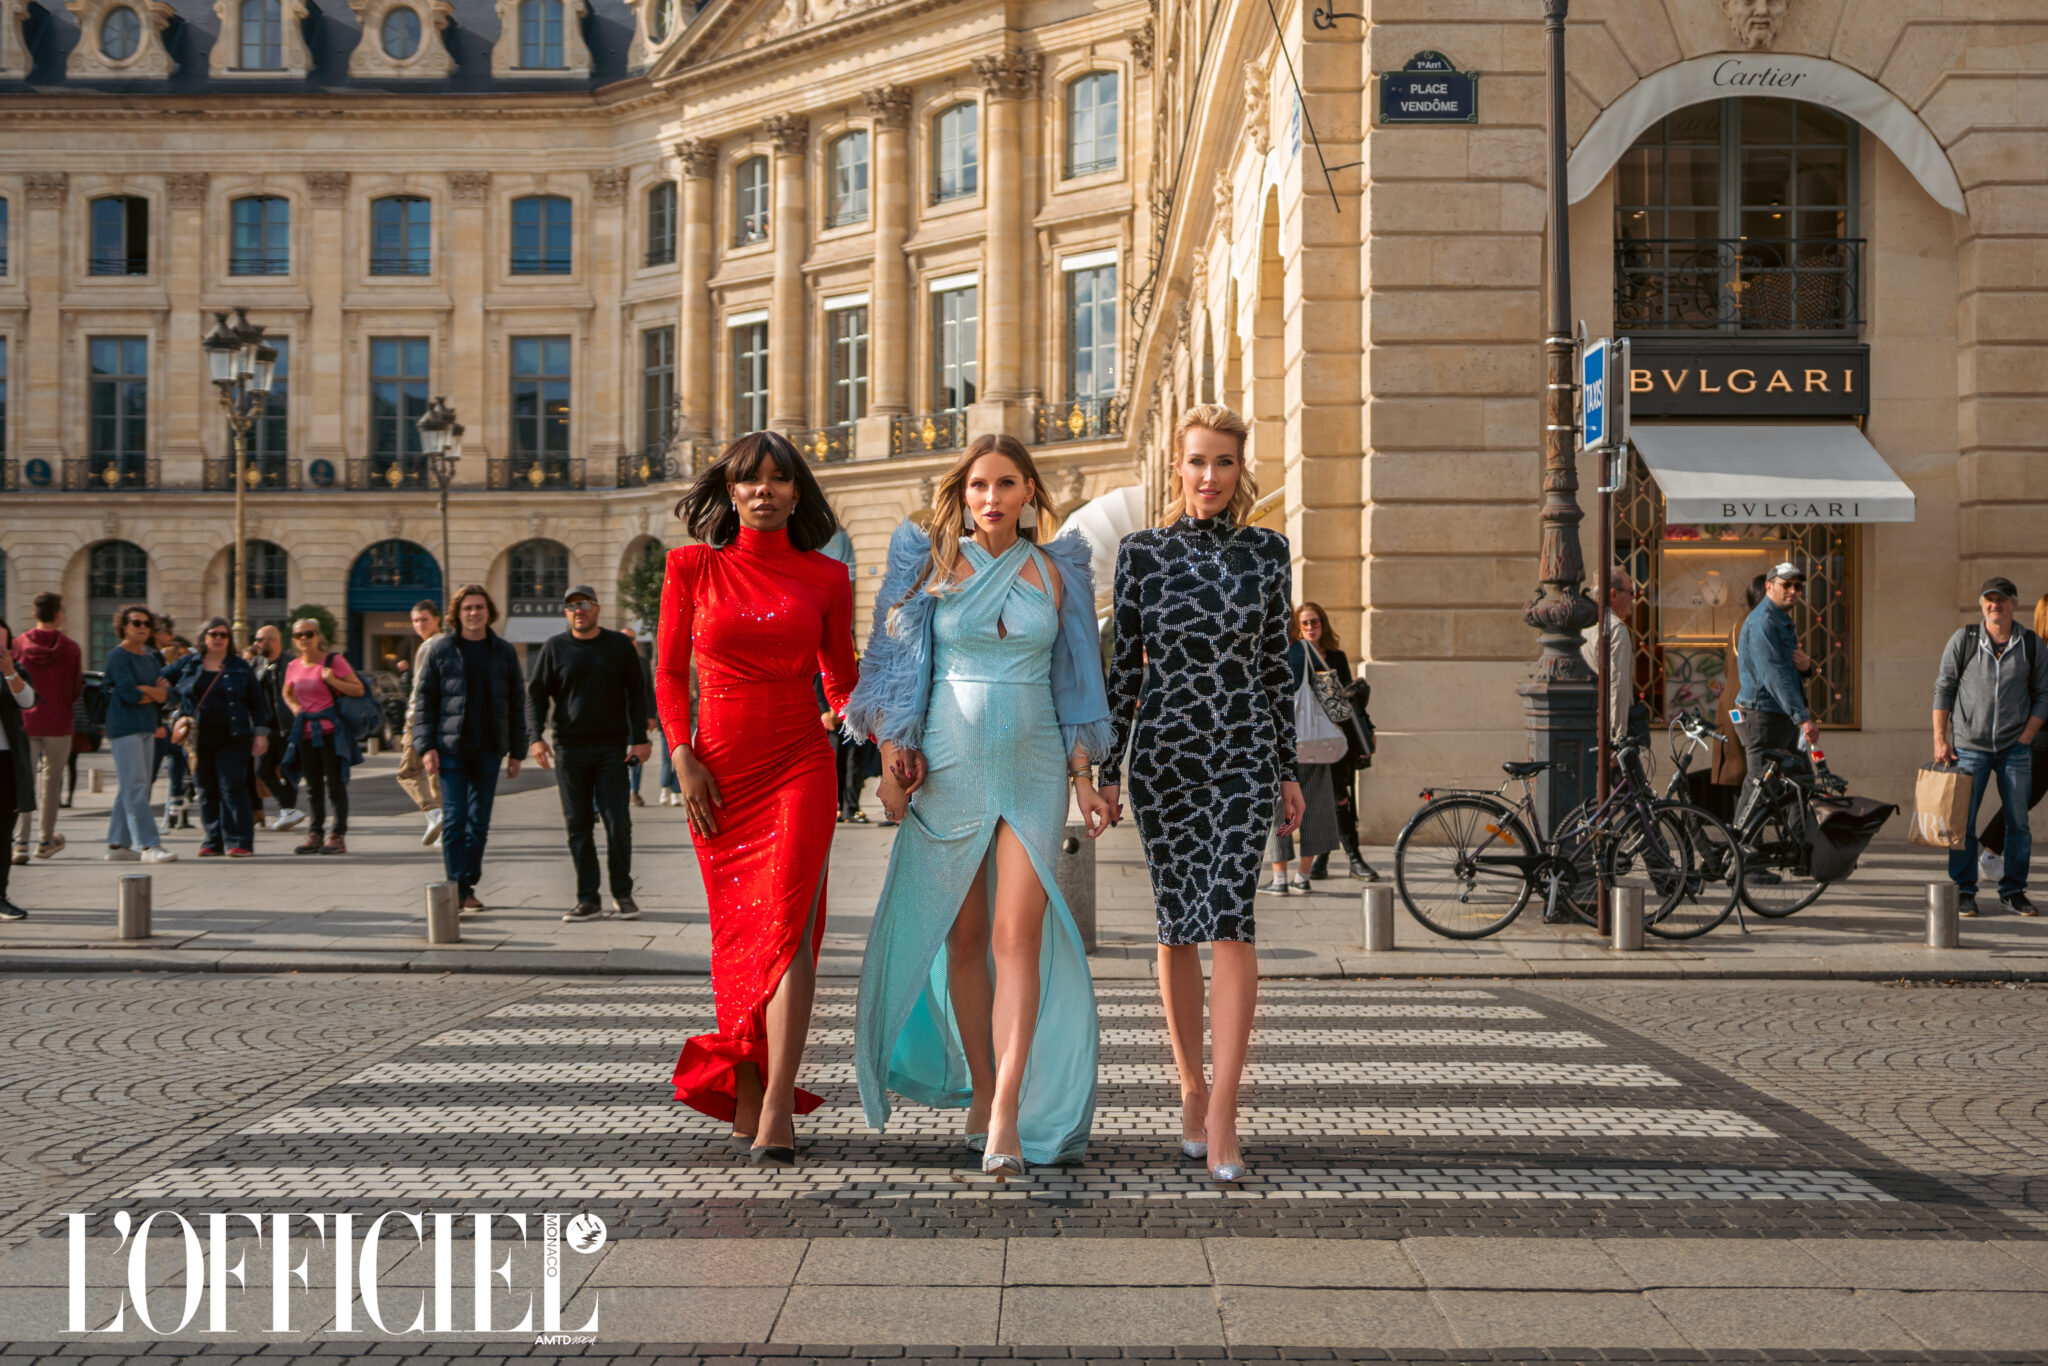 Feature at L'Officiel Monaco during Paris Fashion Week SS 23. Visual Fashion Story from the magical Paris. Featuring: Nicolas Besson, Gemy Maalouf, Charriol, Sol Angelann and more.